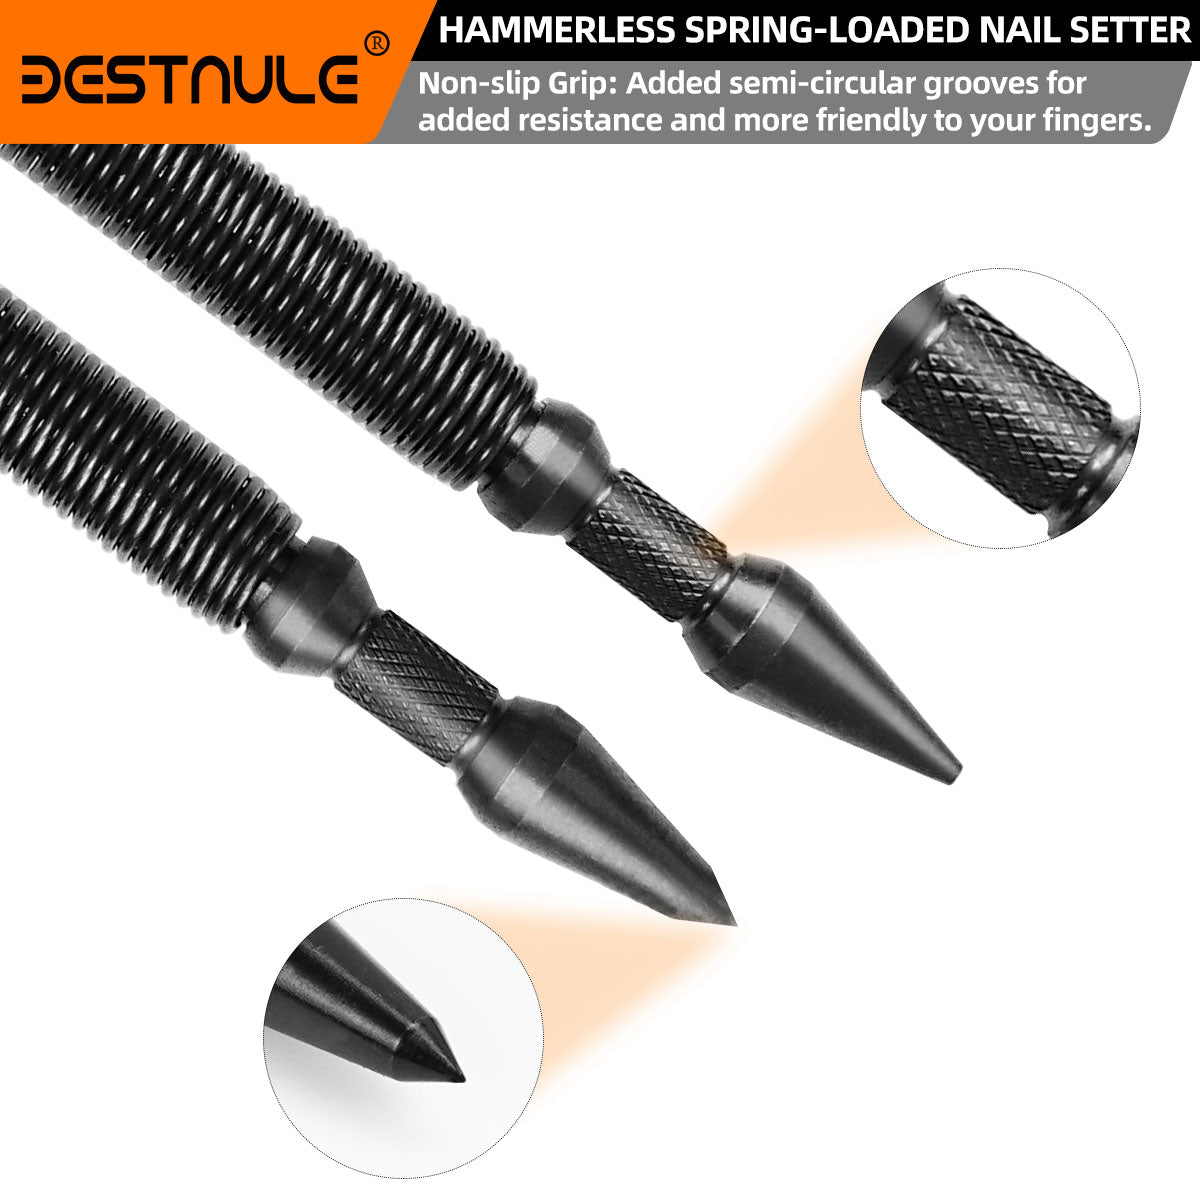 BESTNULE 1-Piece Nail Setter Dual Head Nail Set & Center Punch, Dual Head Center Punch, Spring Loaded Center Hole Punch, Hand Tool for Metal or Wood, Nail Setter, Nail Tool Features 1/16-in, 3/16-in